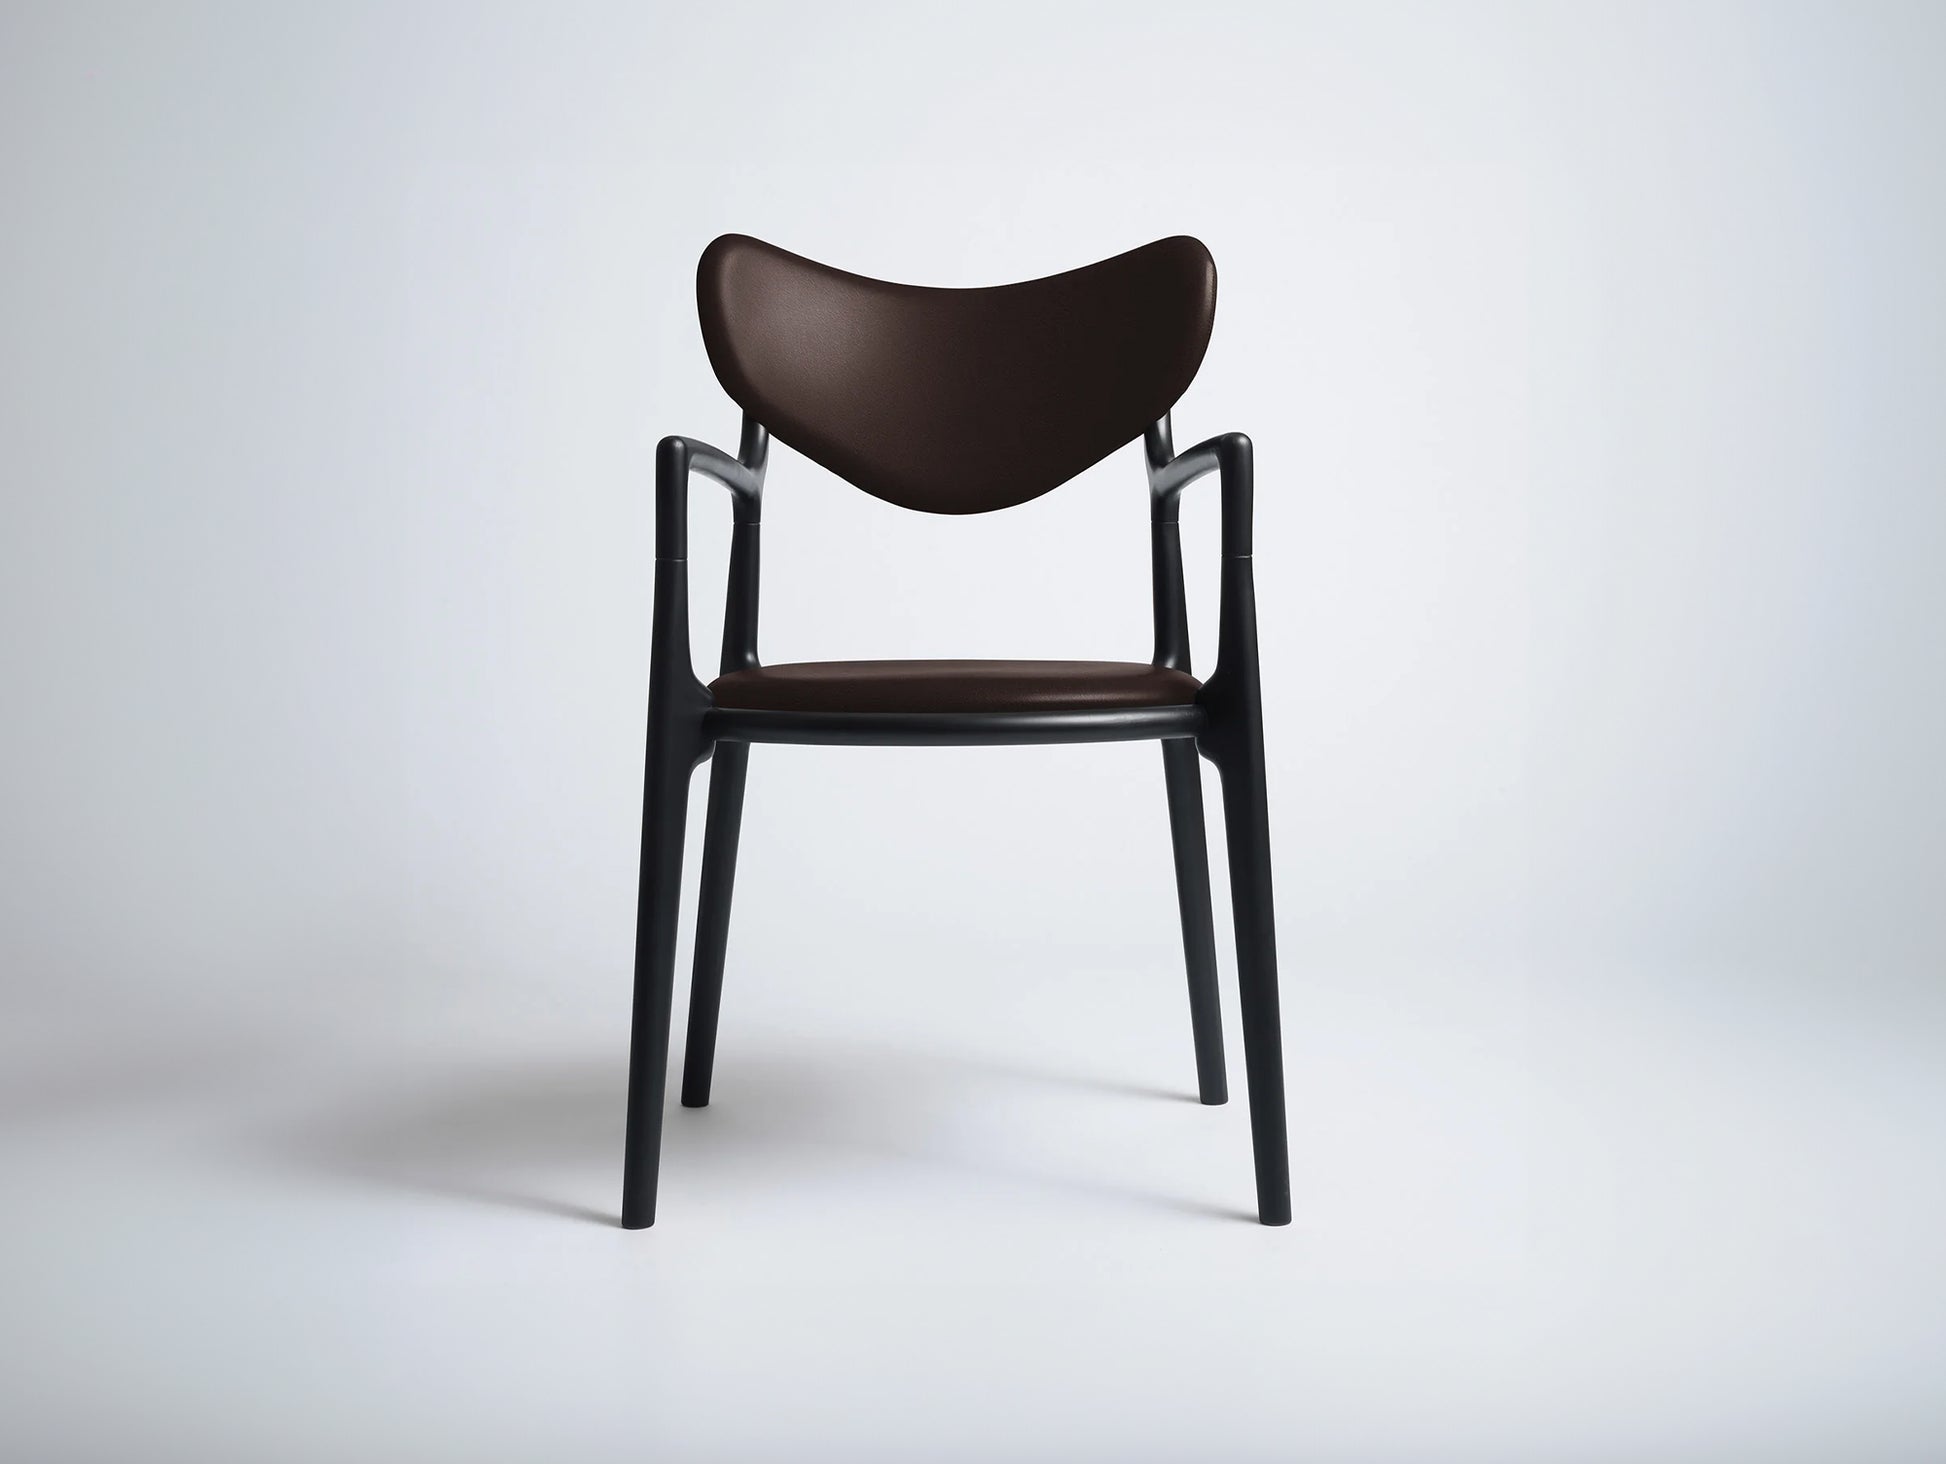 Salon Chair by Ro Collection - Black Lacquered Beech / Exclusive Rio Chocolate Brown Leather